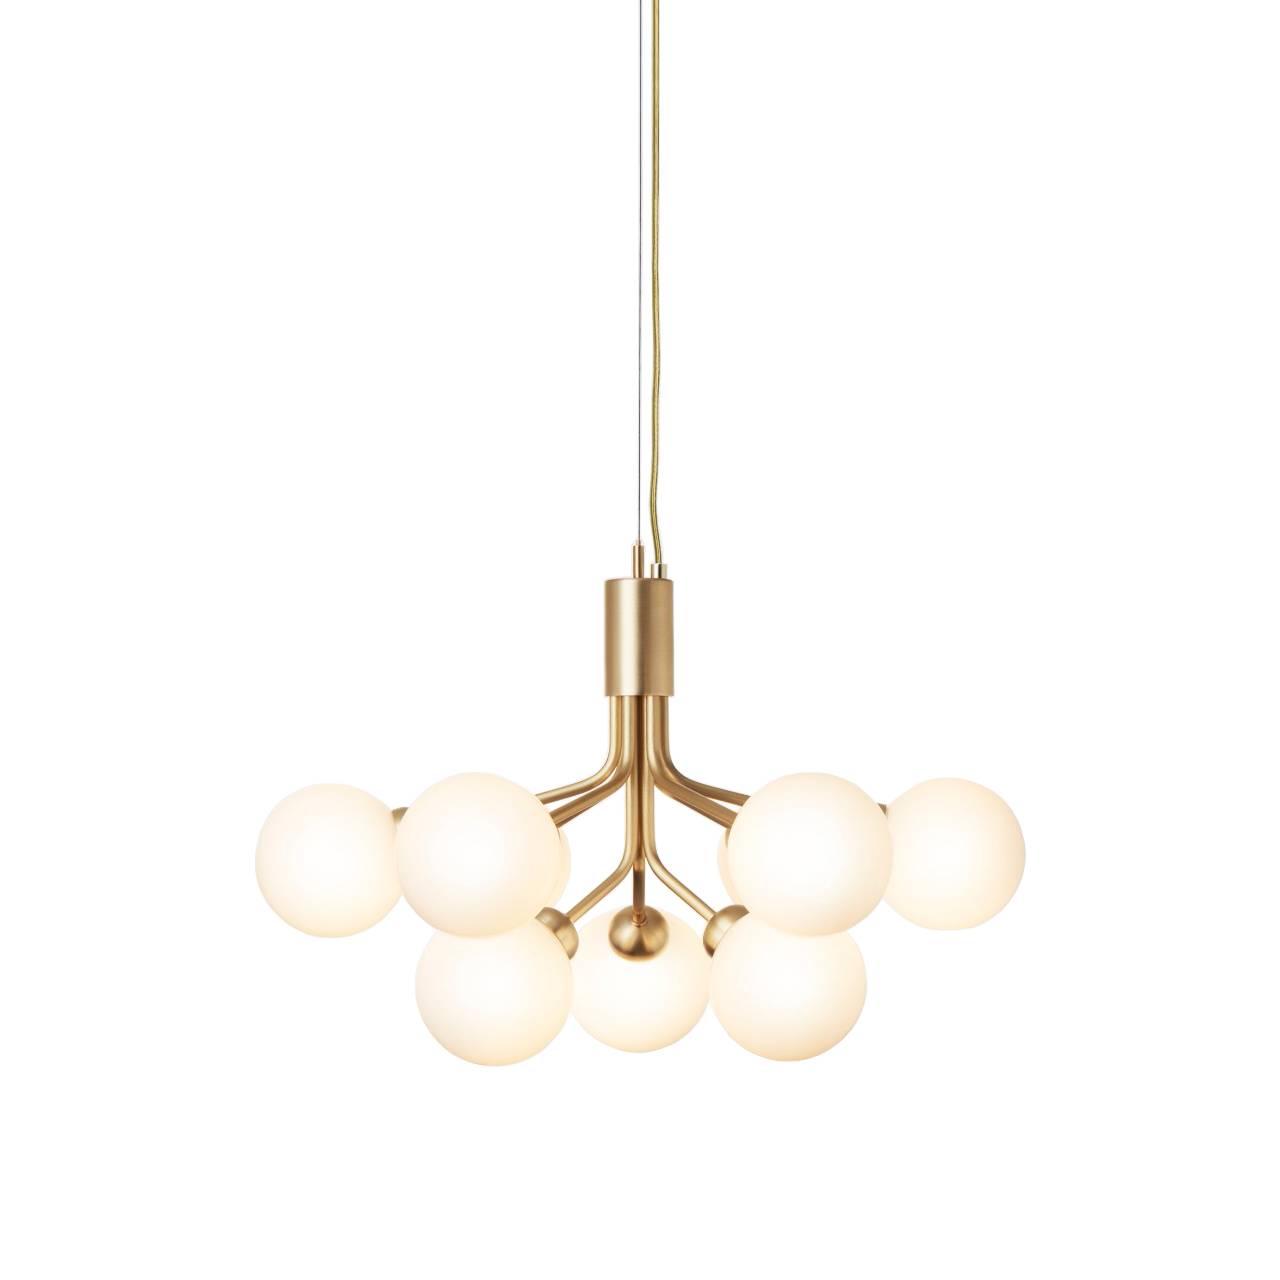 Apiales 9 Chandelier: Brushed Brass + Opal White + Gold